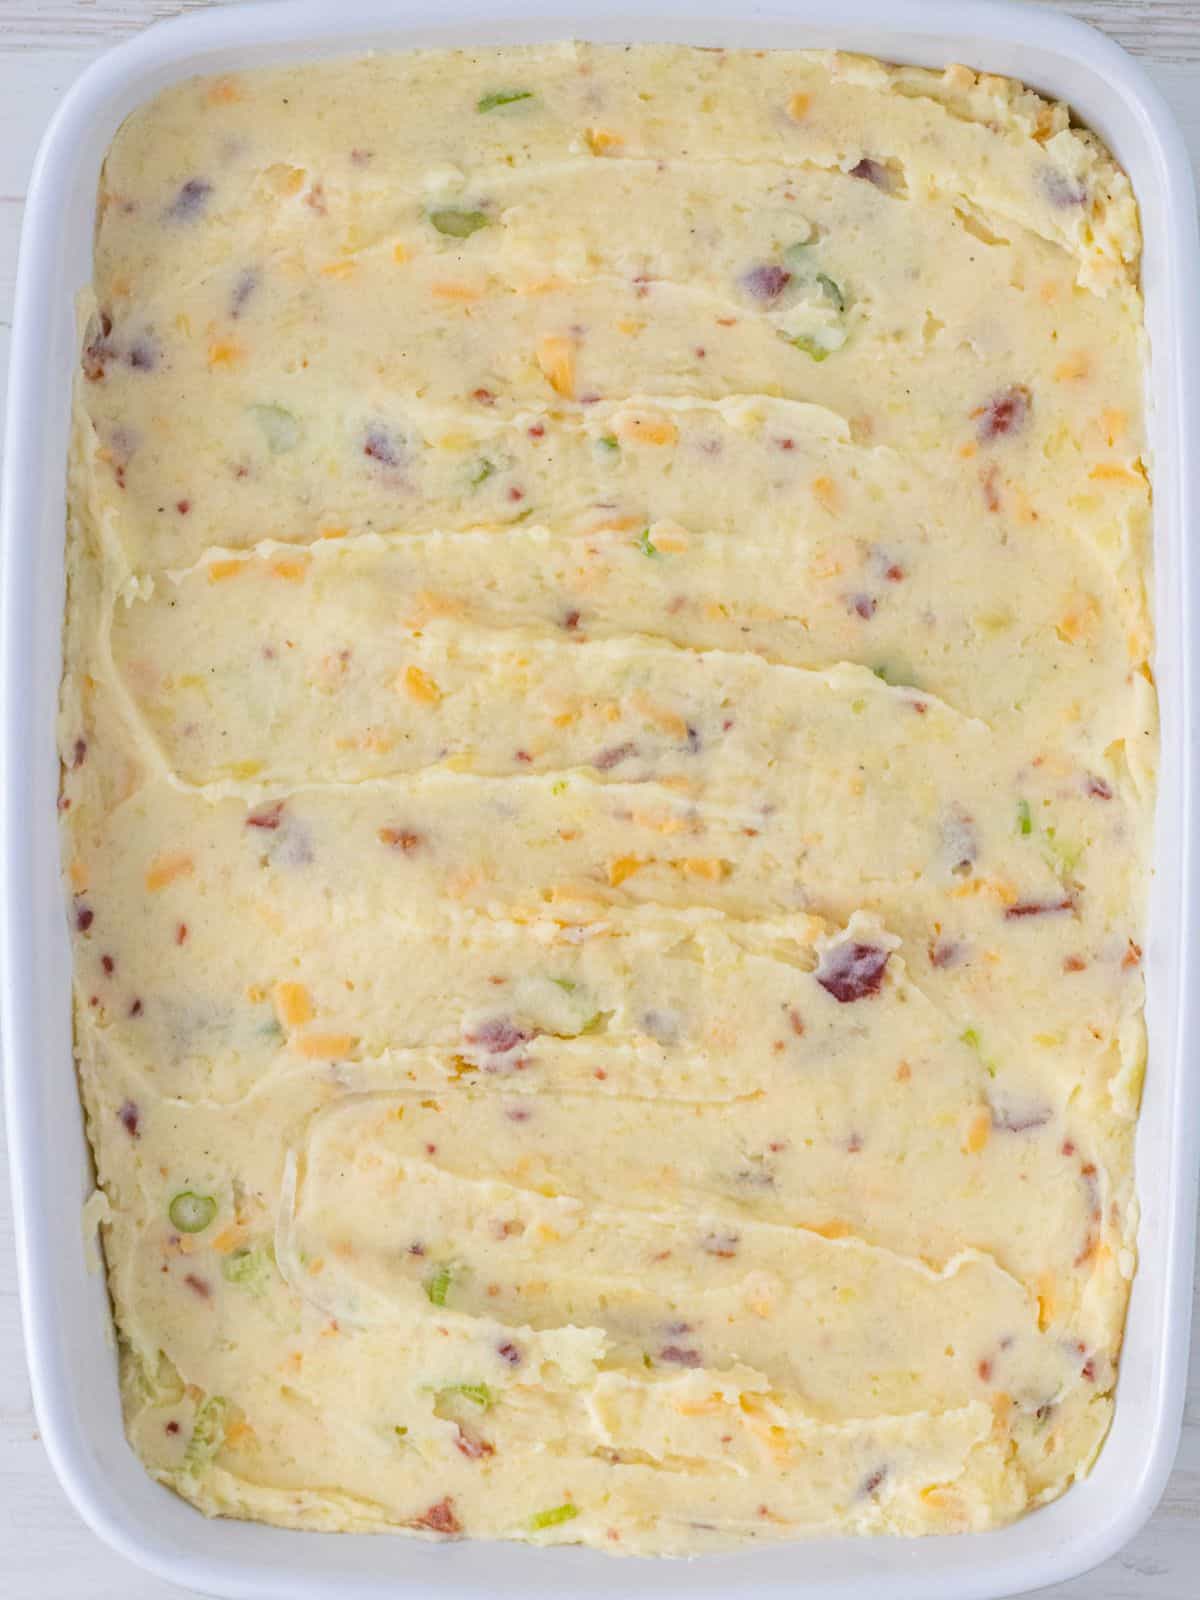 Loaded mashed potato filling in a baking dish.